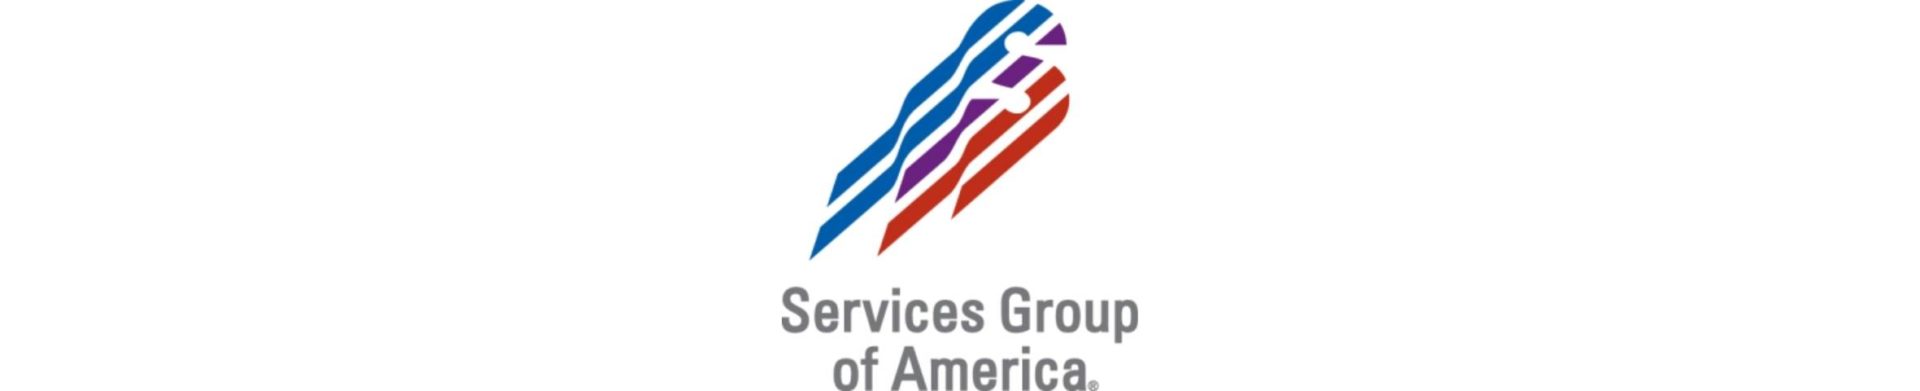 the logo for Services Group of America